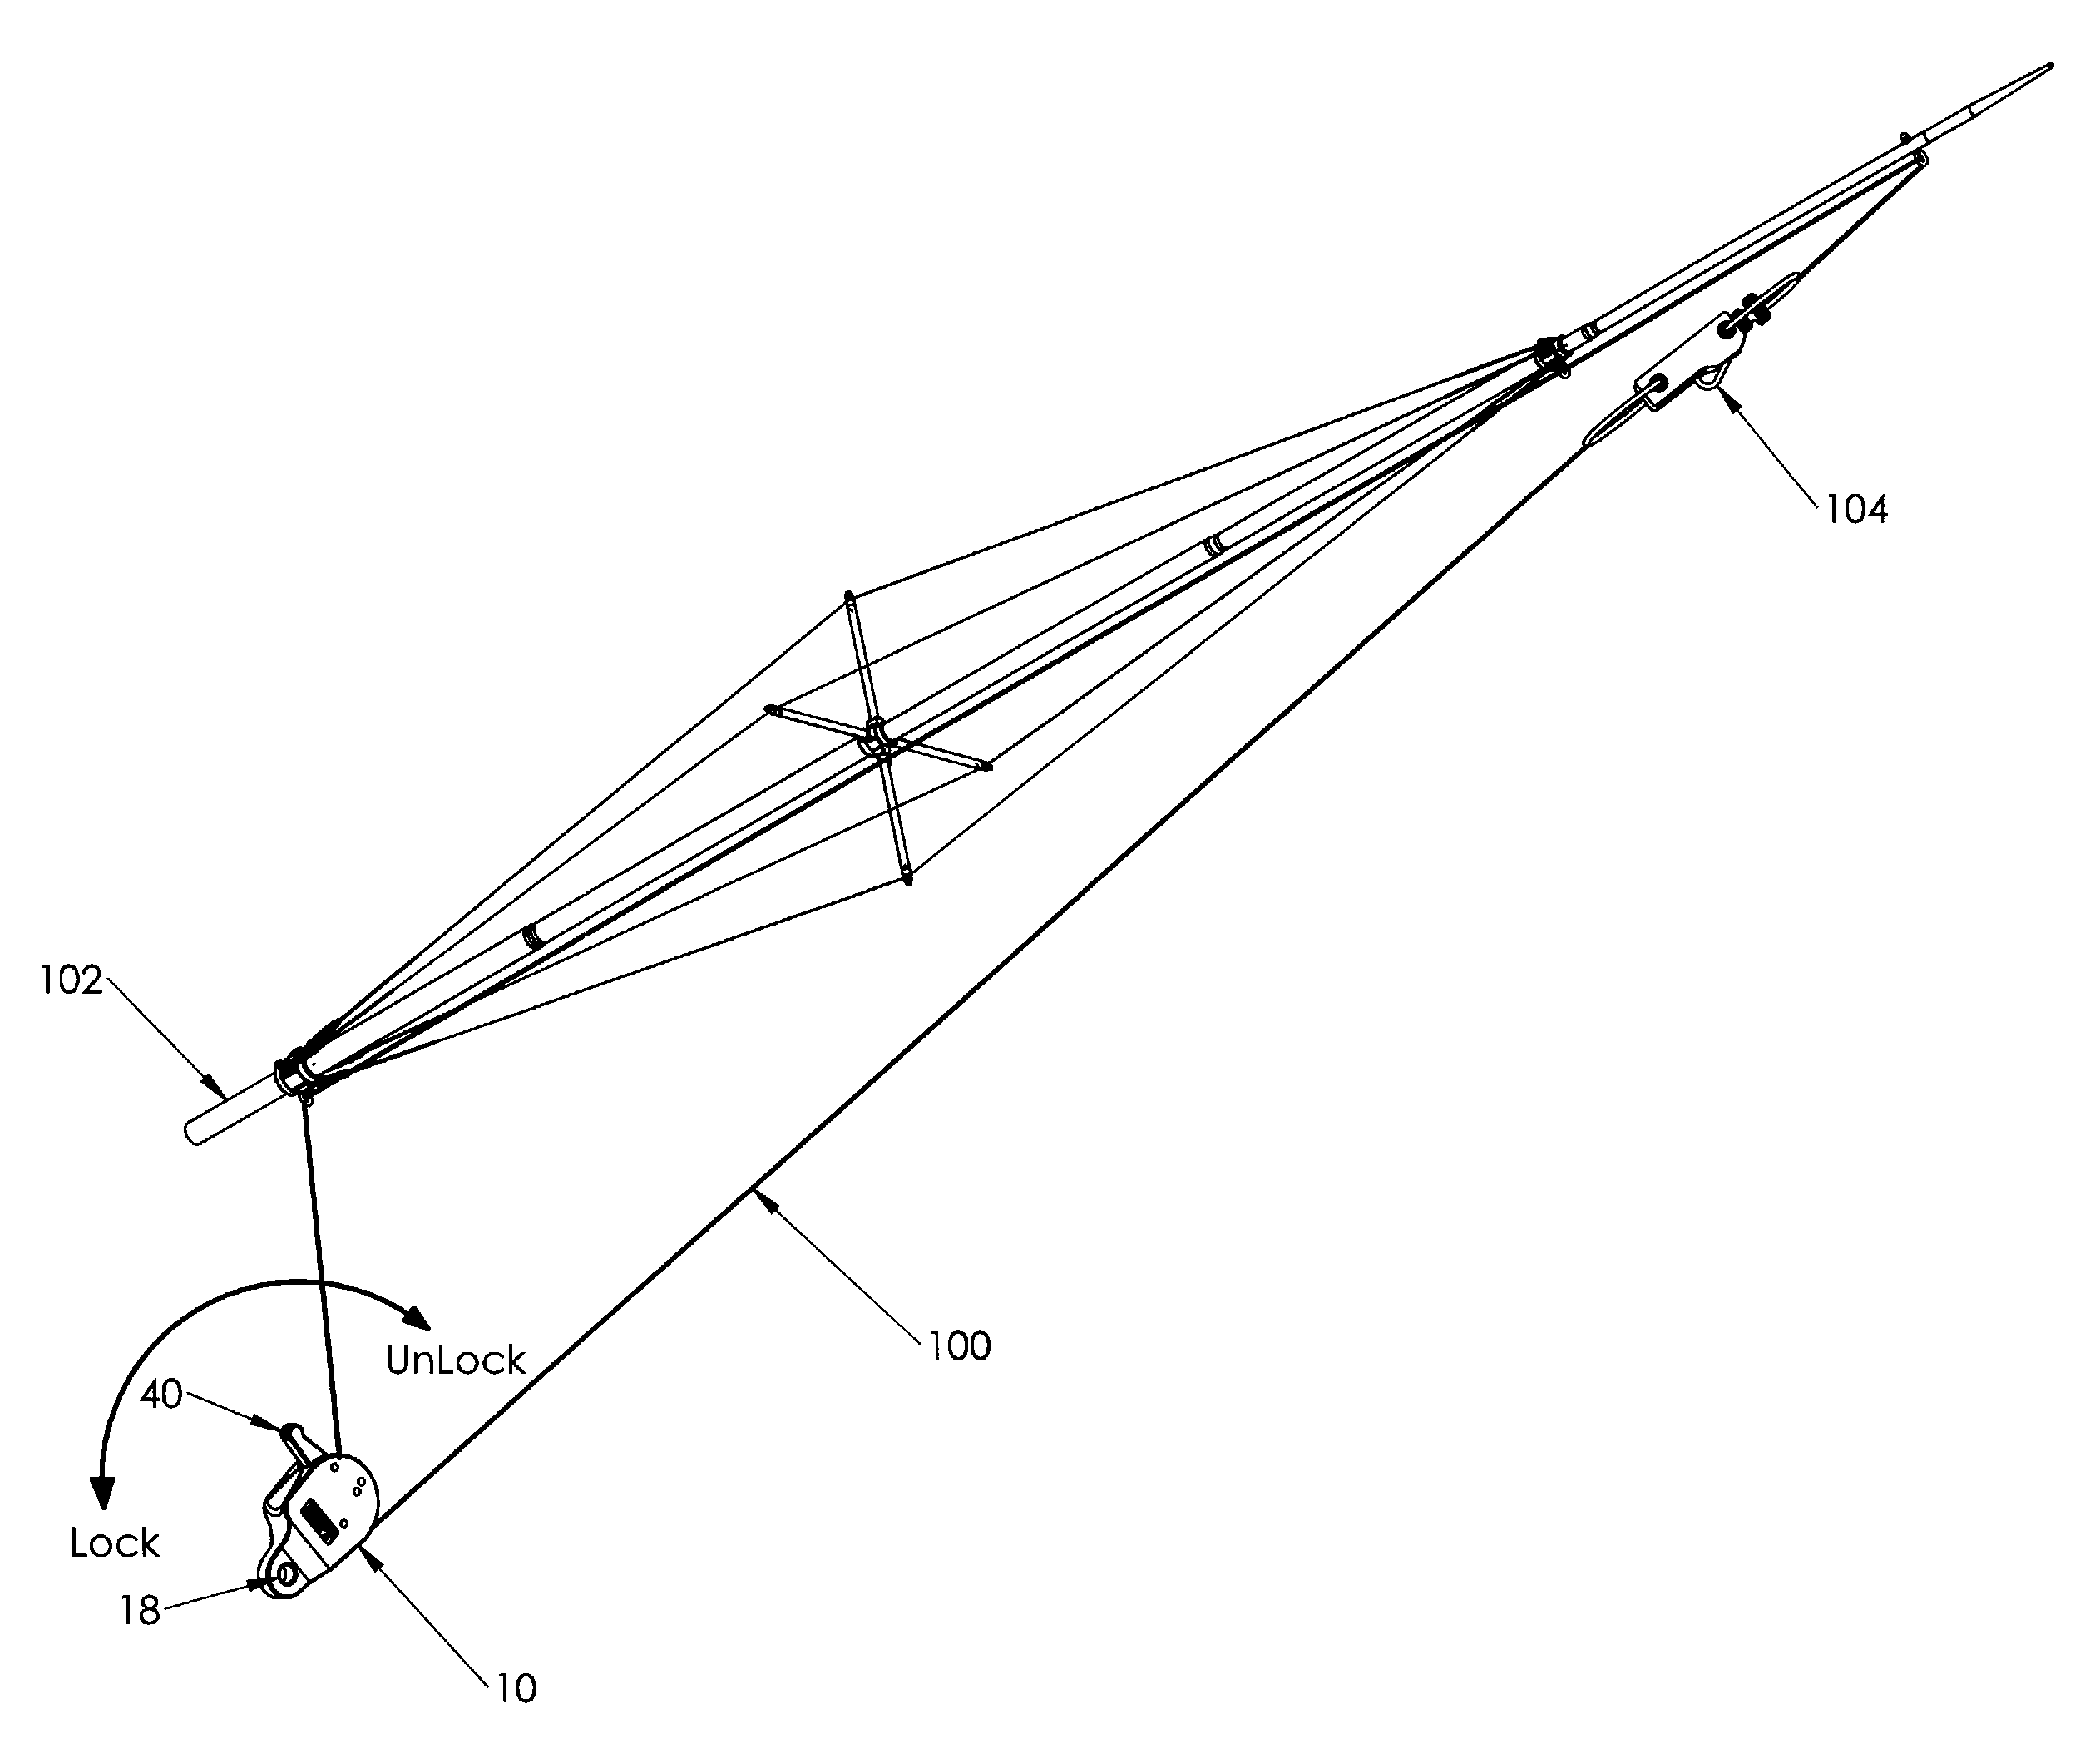 Outrigger line lock positioning device